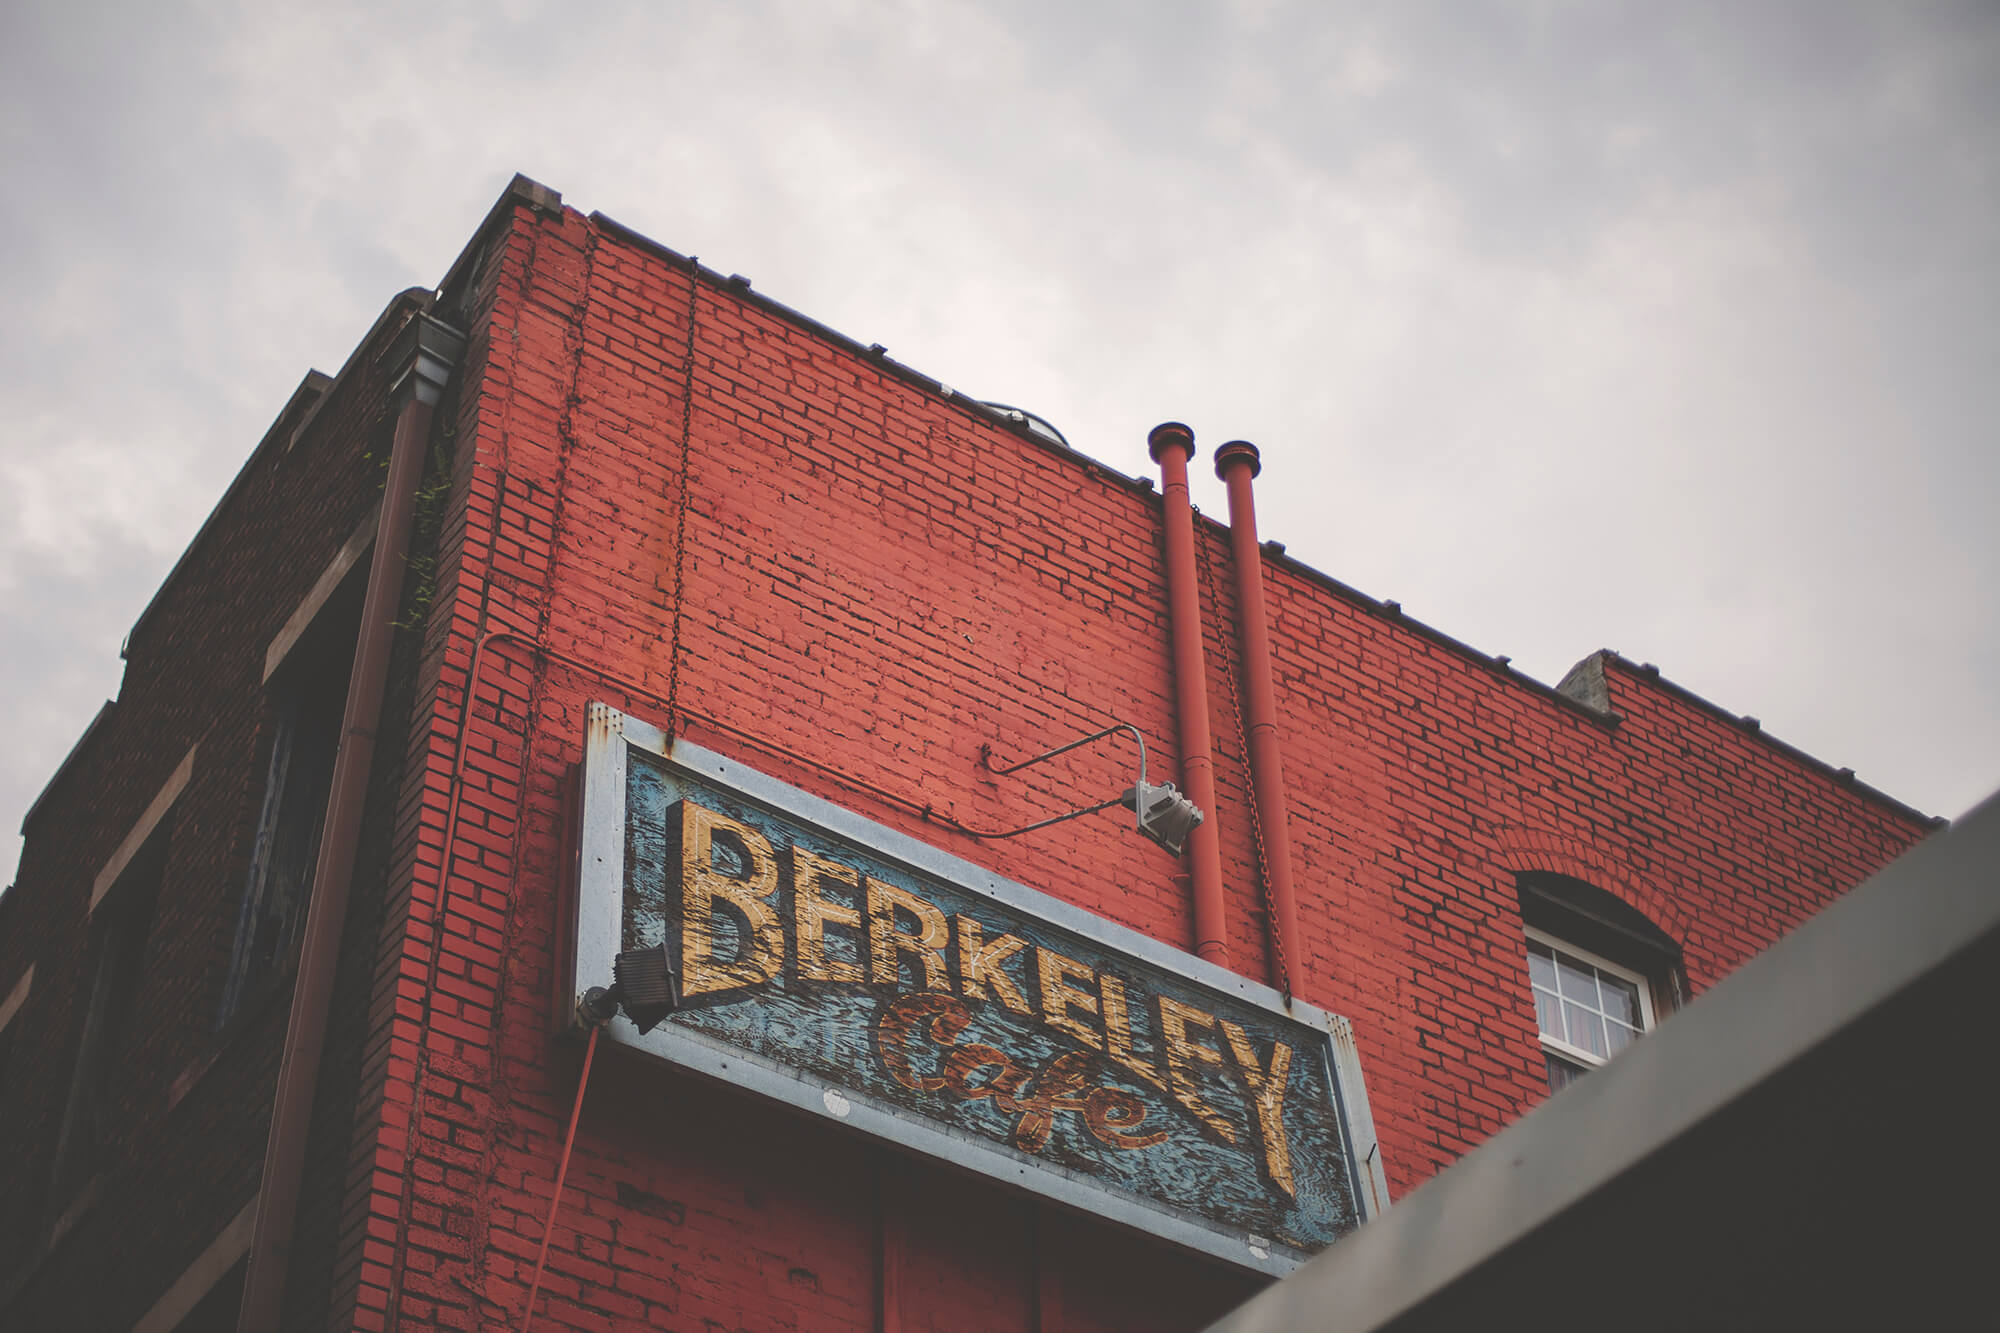 The side of a red brick building with a sign that reads "Berkeley Cafe"